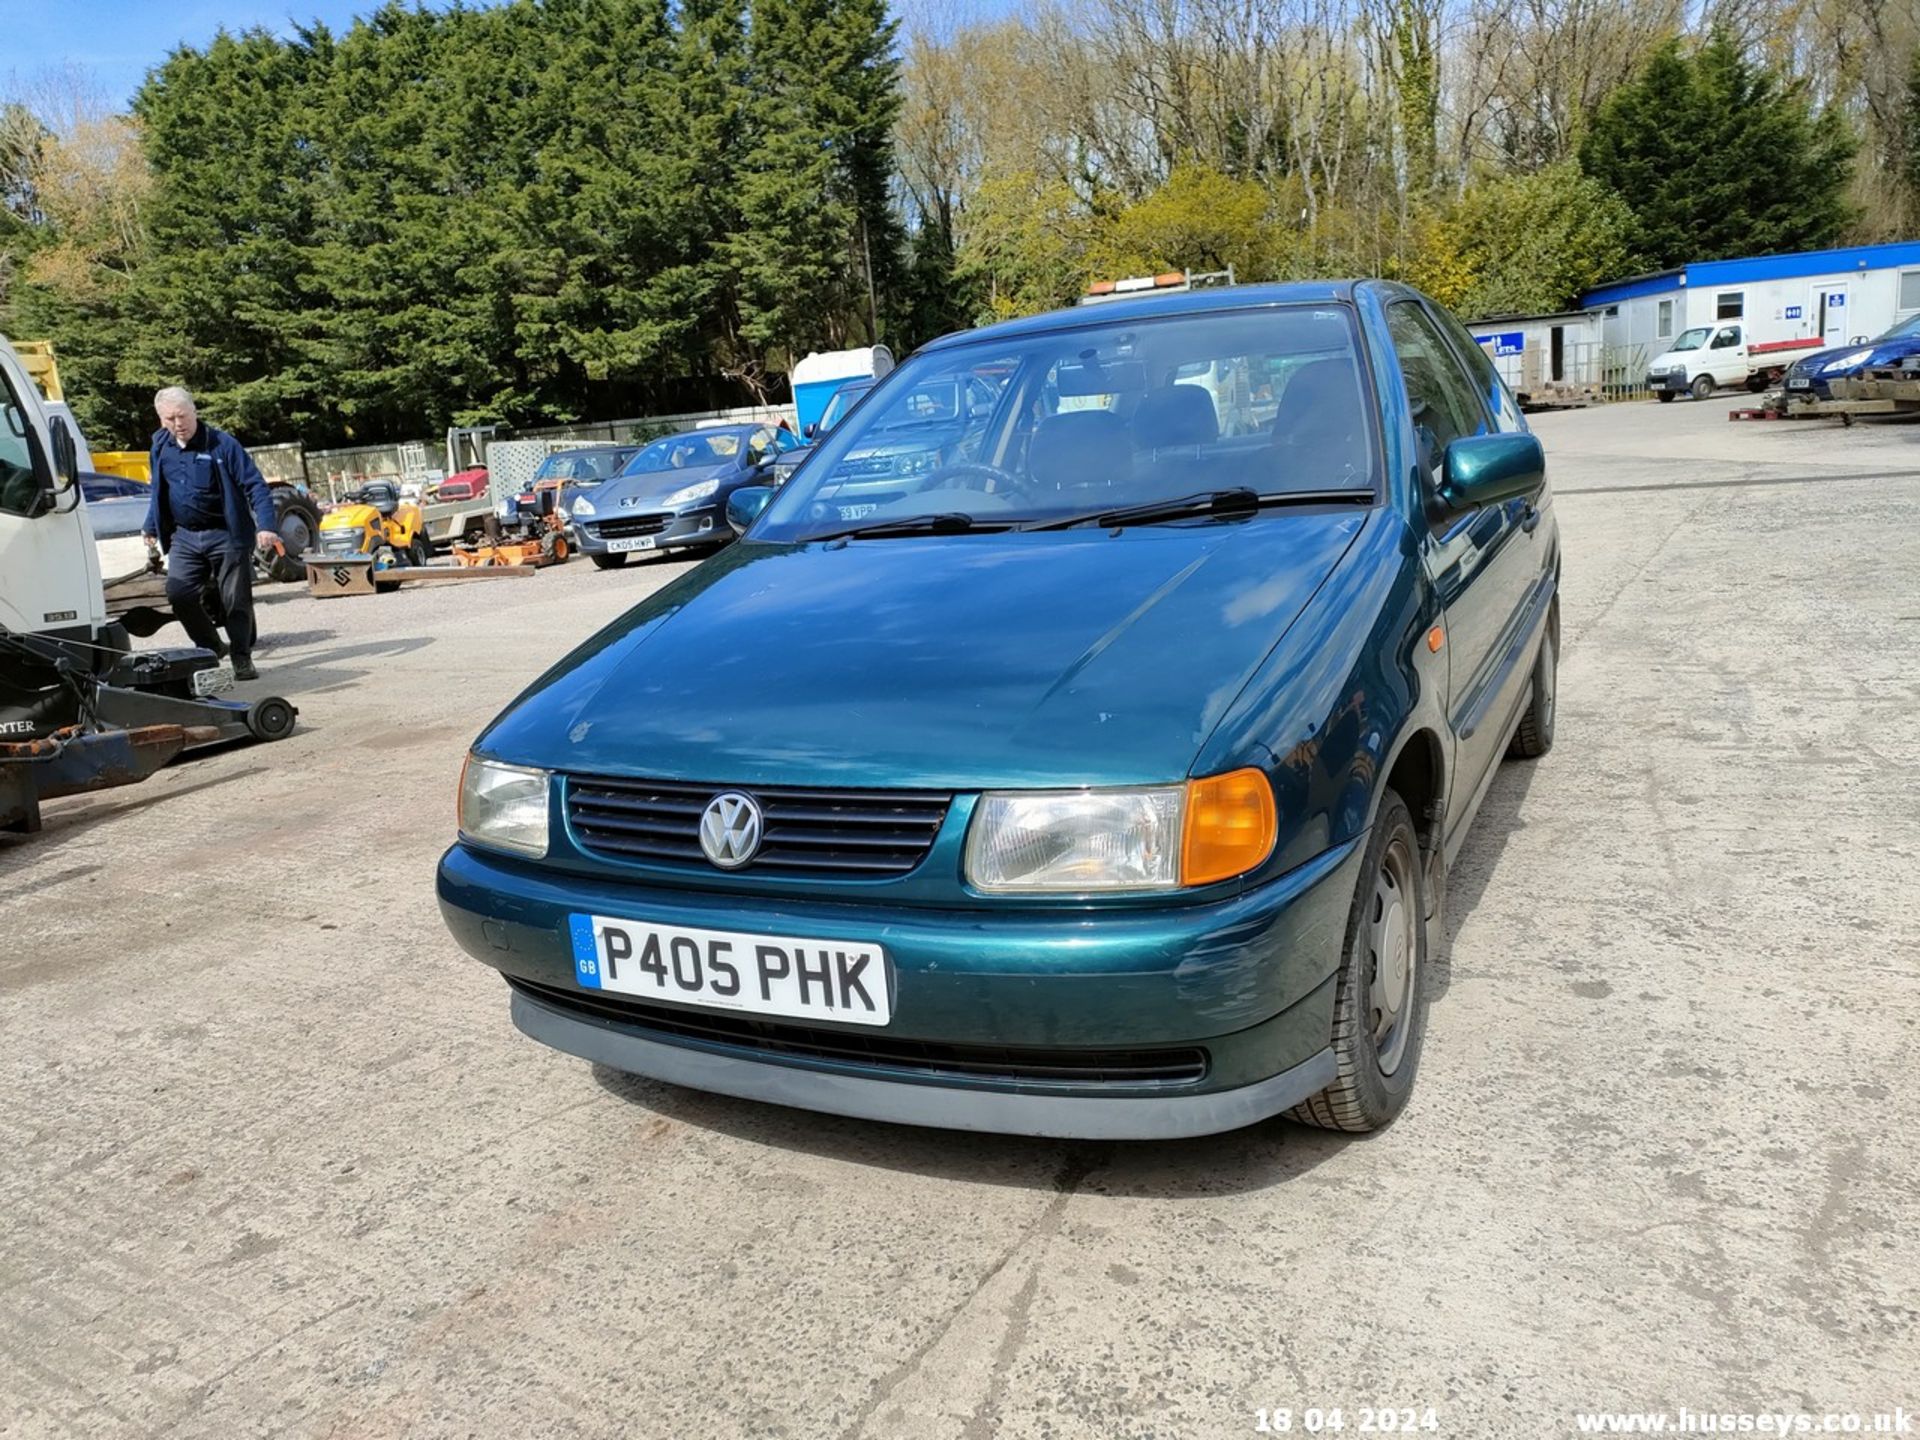 1997 VOLKSWAGEN POLO 1.4 CL AUTO - 1390cc 3dr Hatchback (Green, 68k) - Image 9 of 60